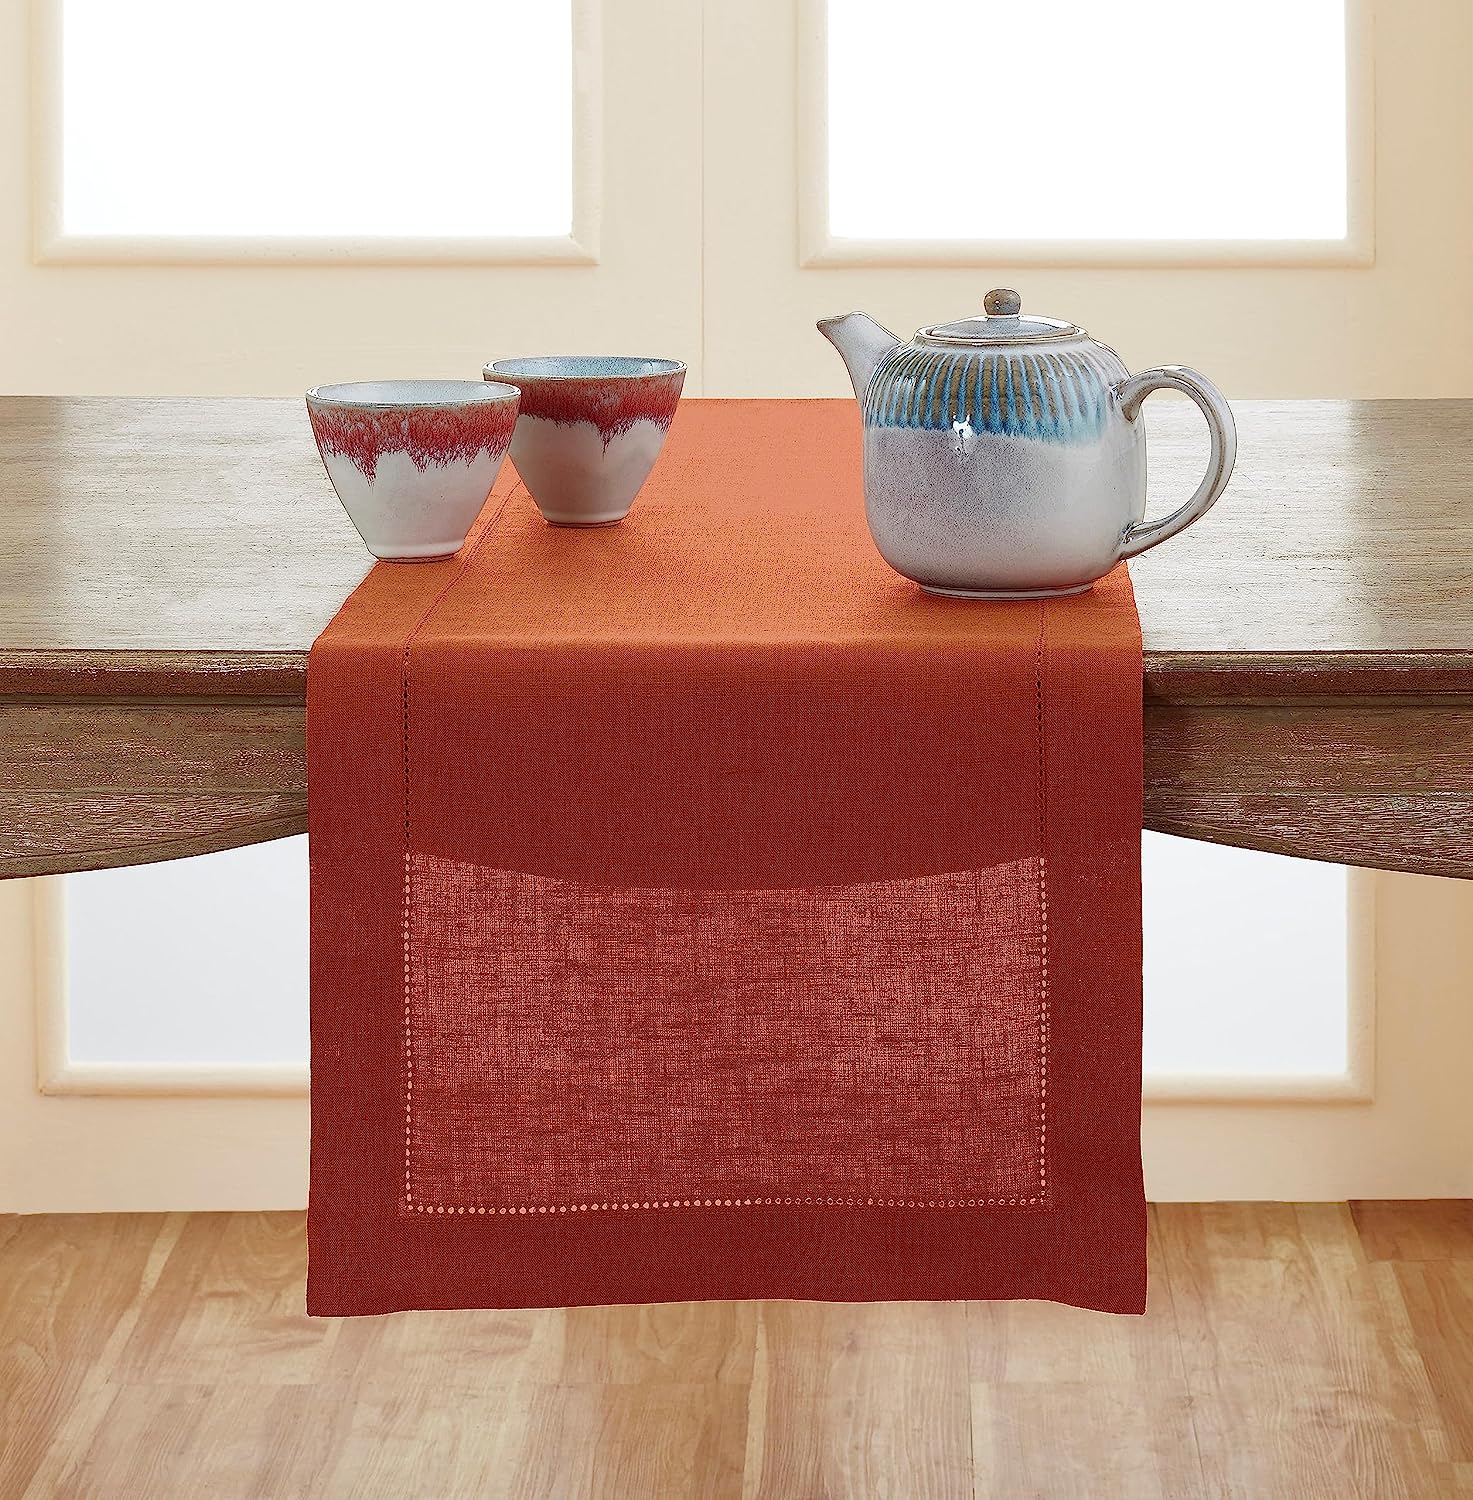 Hemstitched Table Linens (Cinnamon Color)